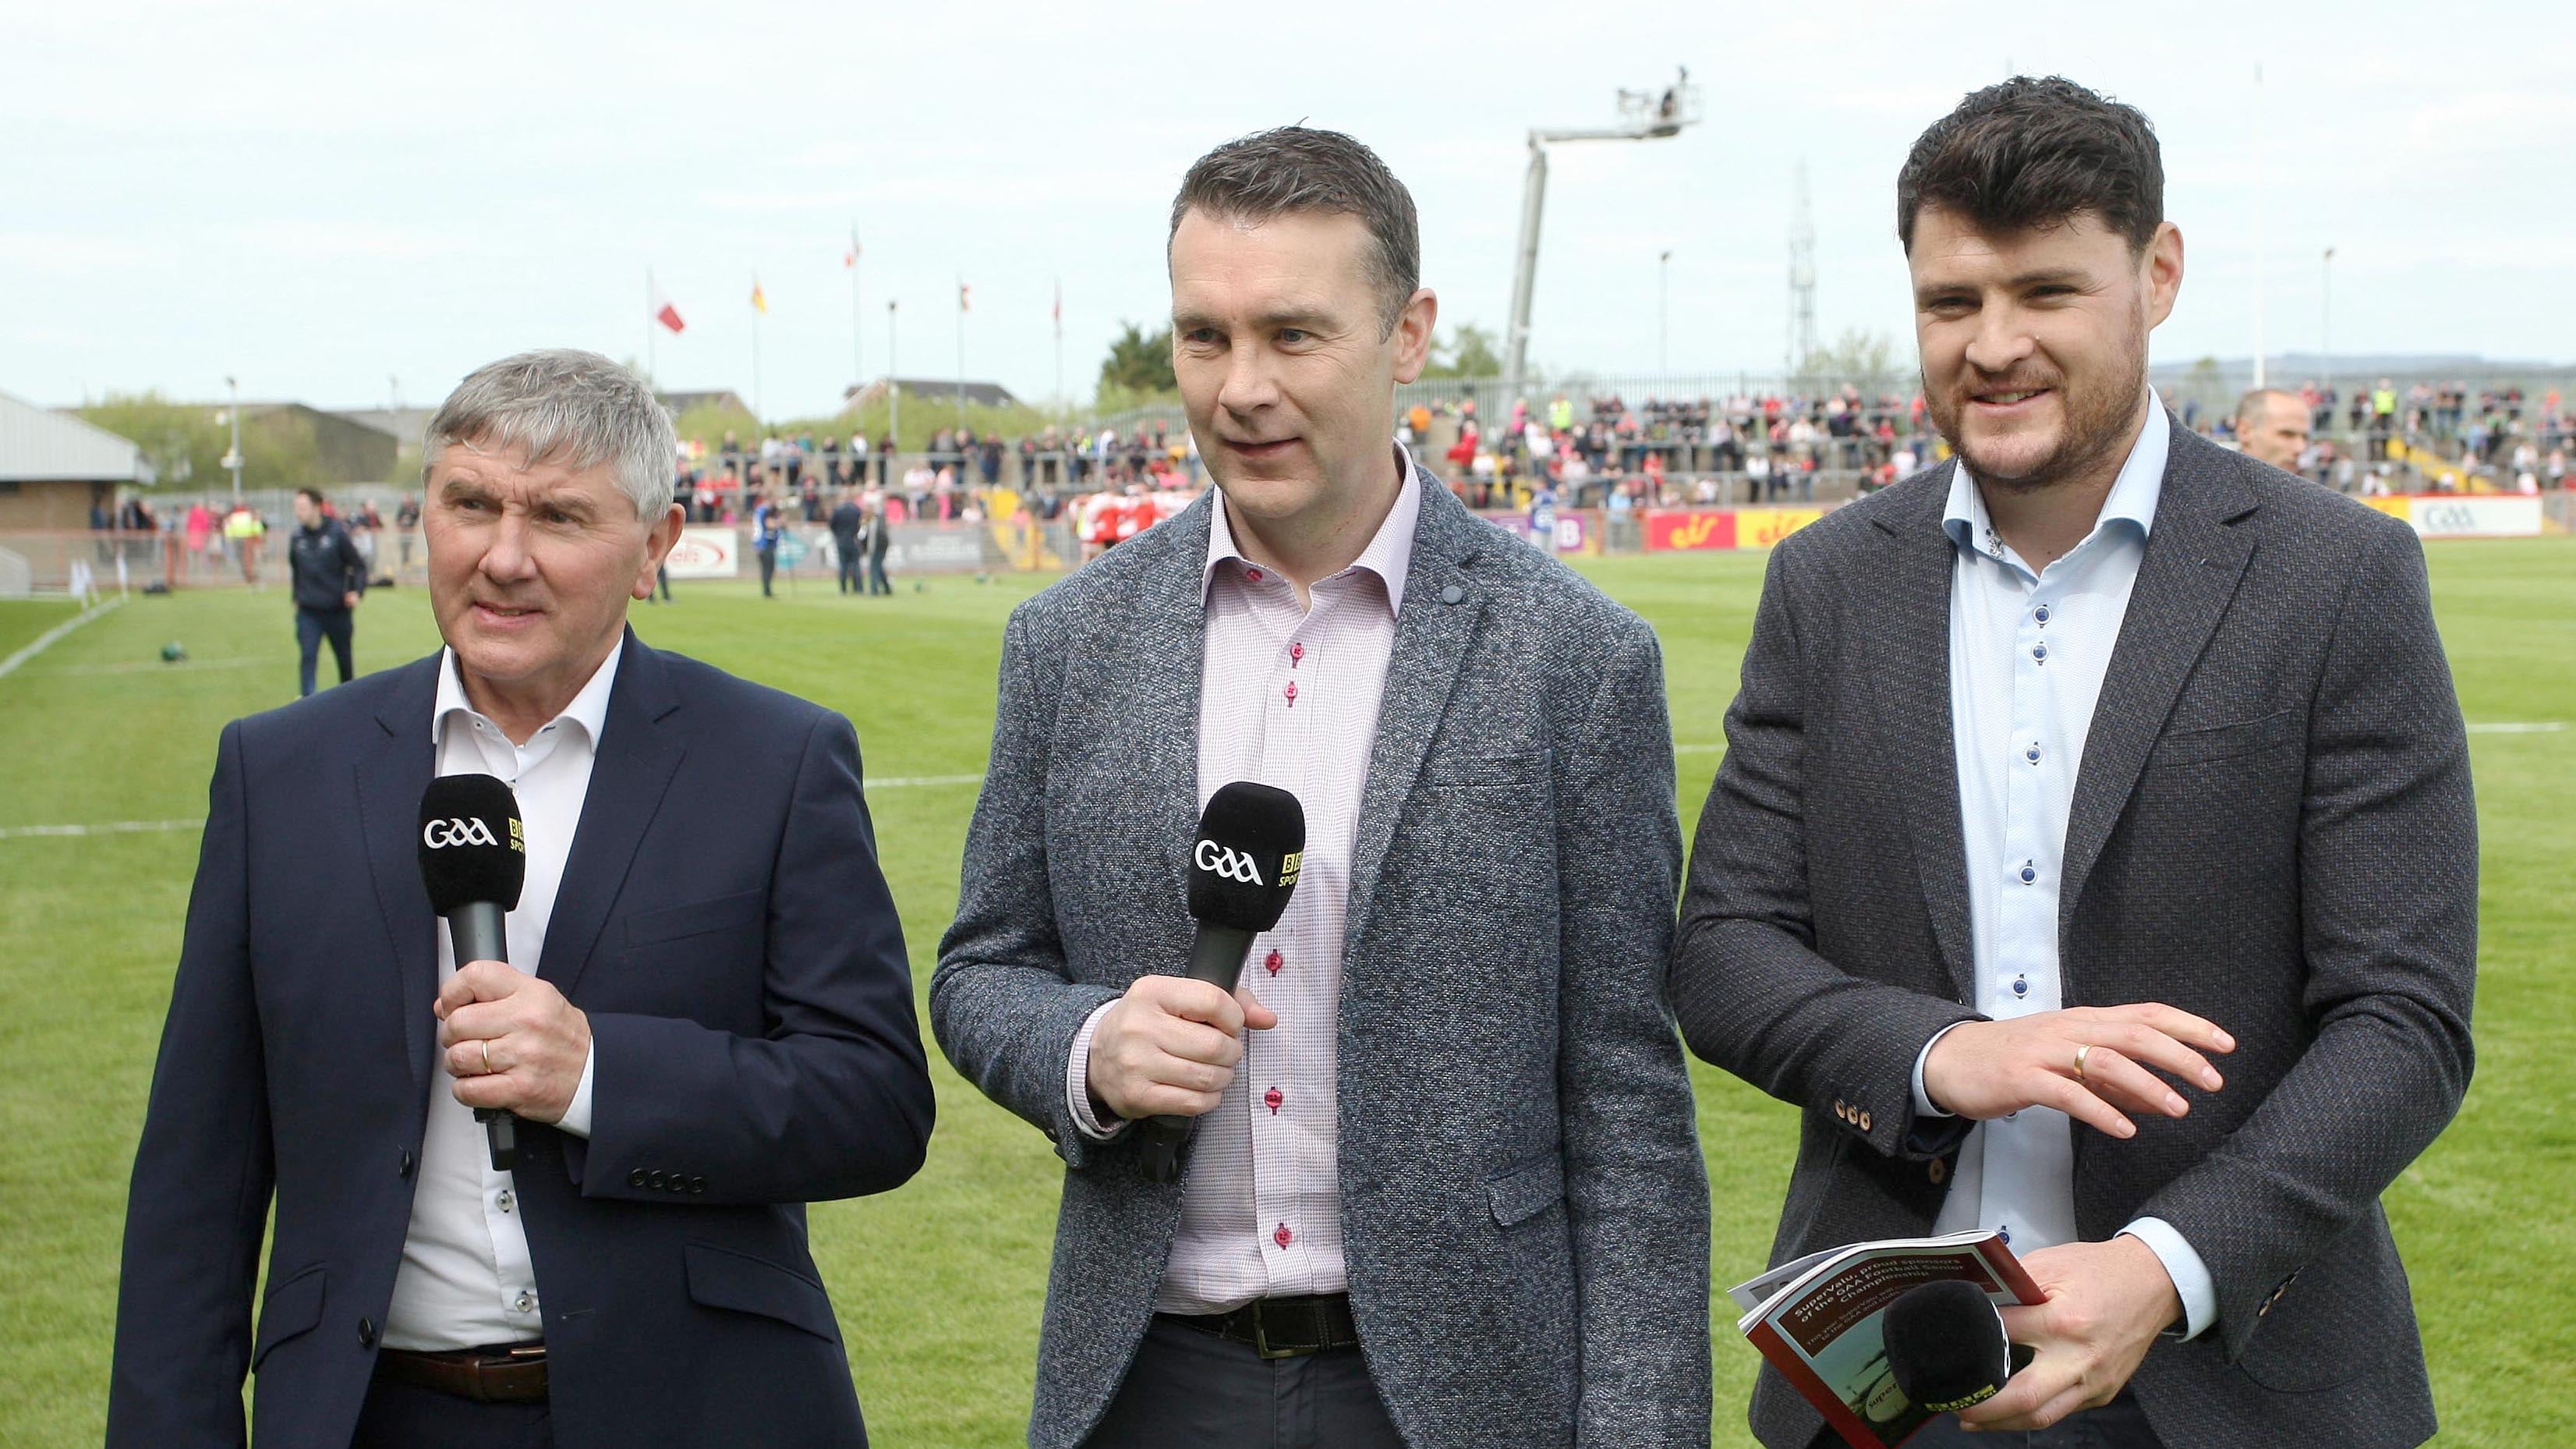 Oisin McConville and Marty Clarke were part of the BBC's Championship punditry team, and will meet again on the line in Newry on Saturday. Picture by INPHO